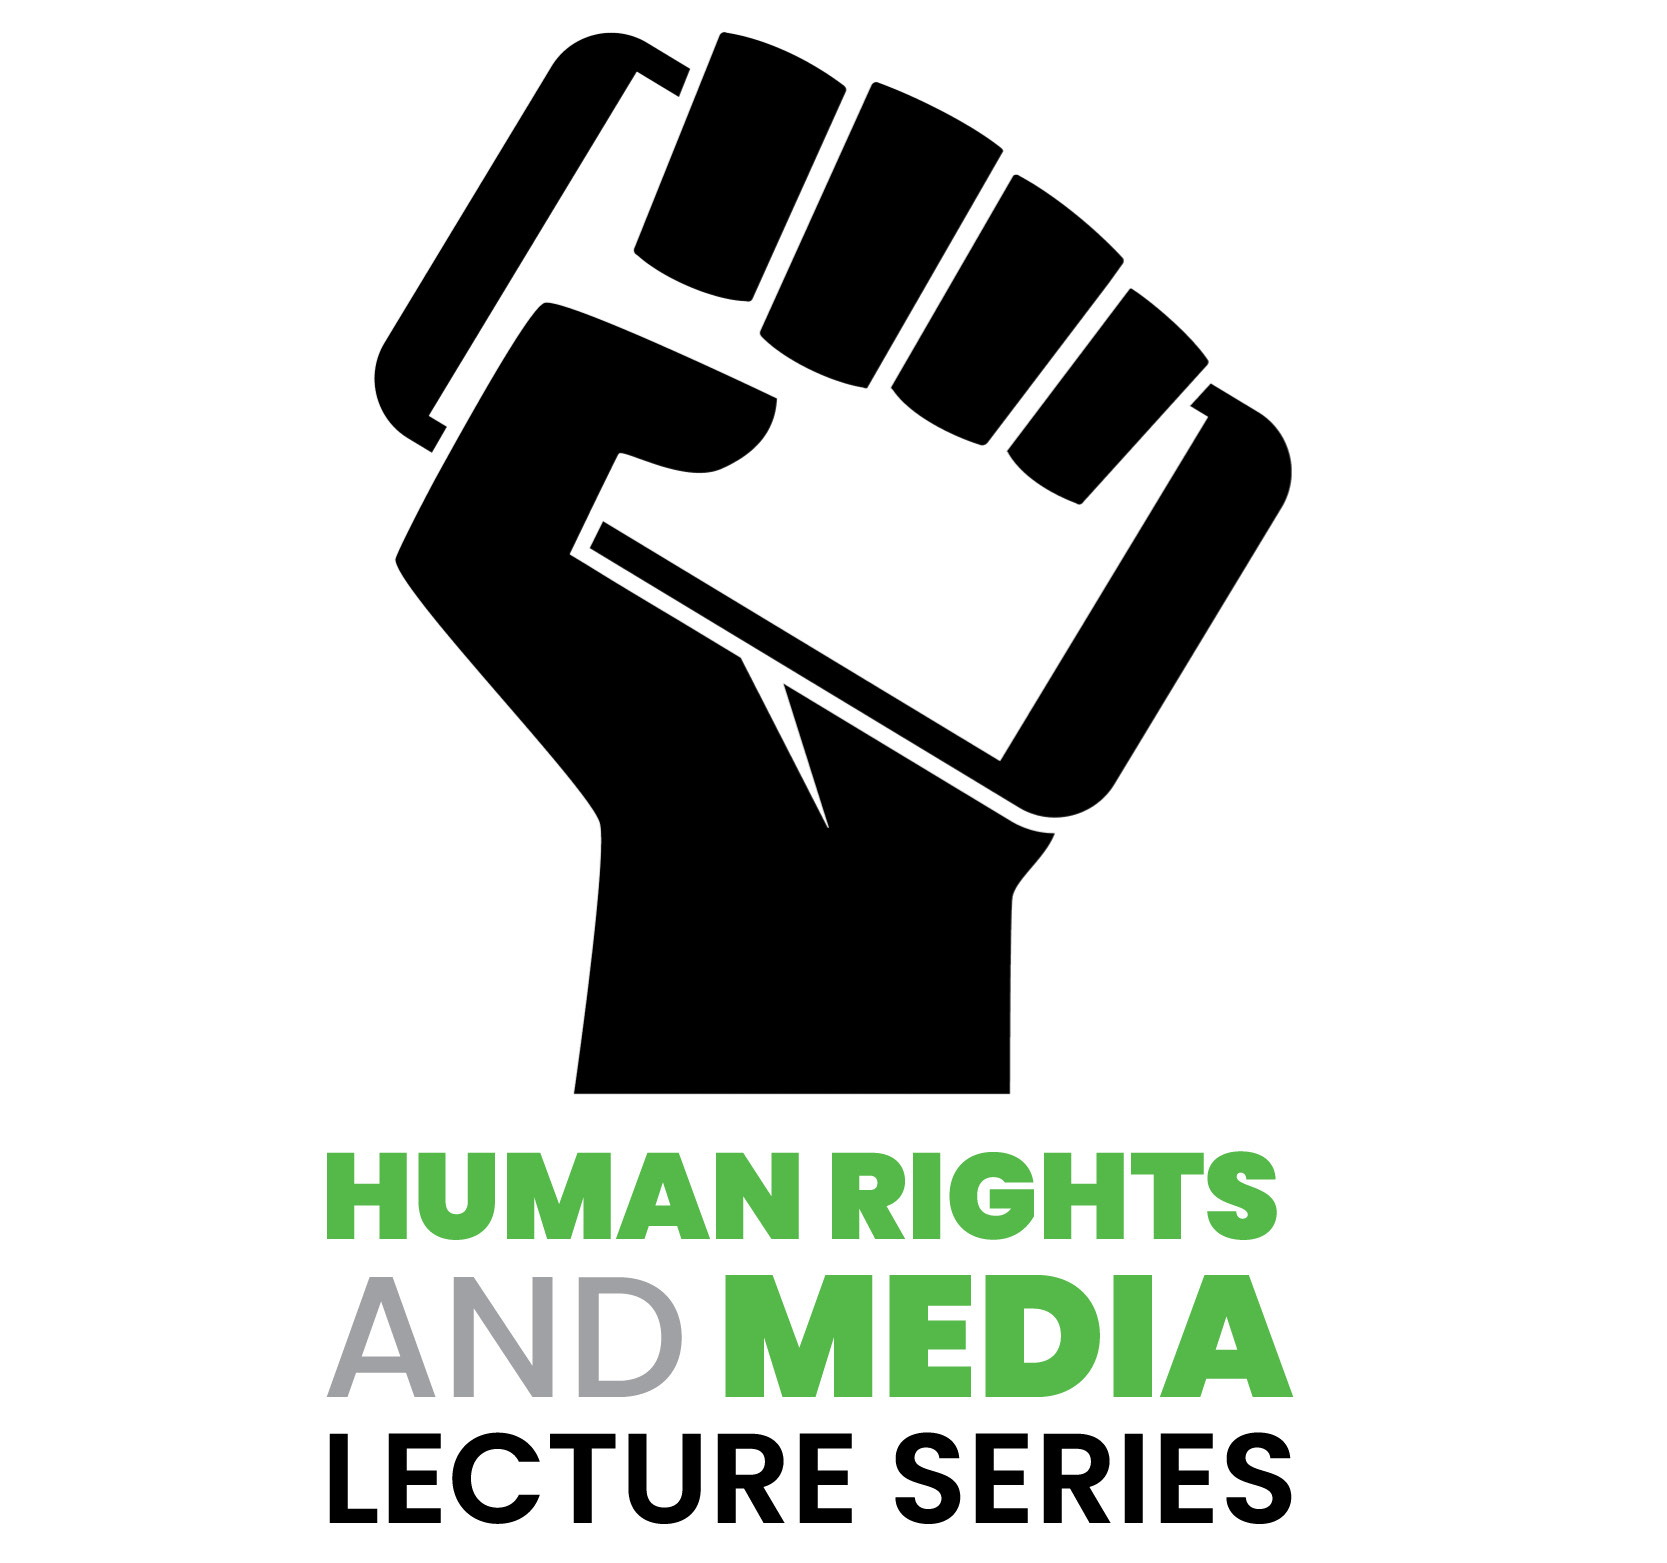 Image for Human Rights and Media Lecture Series